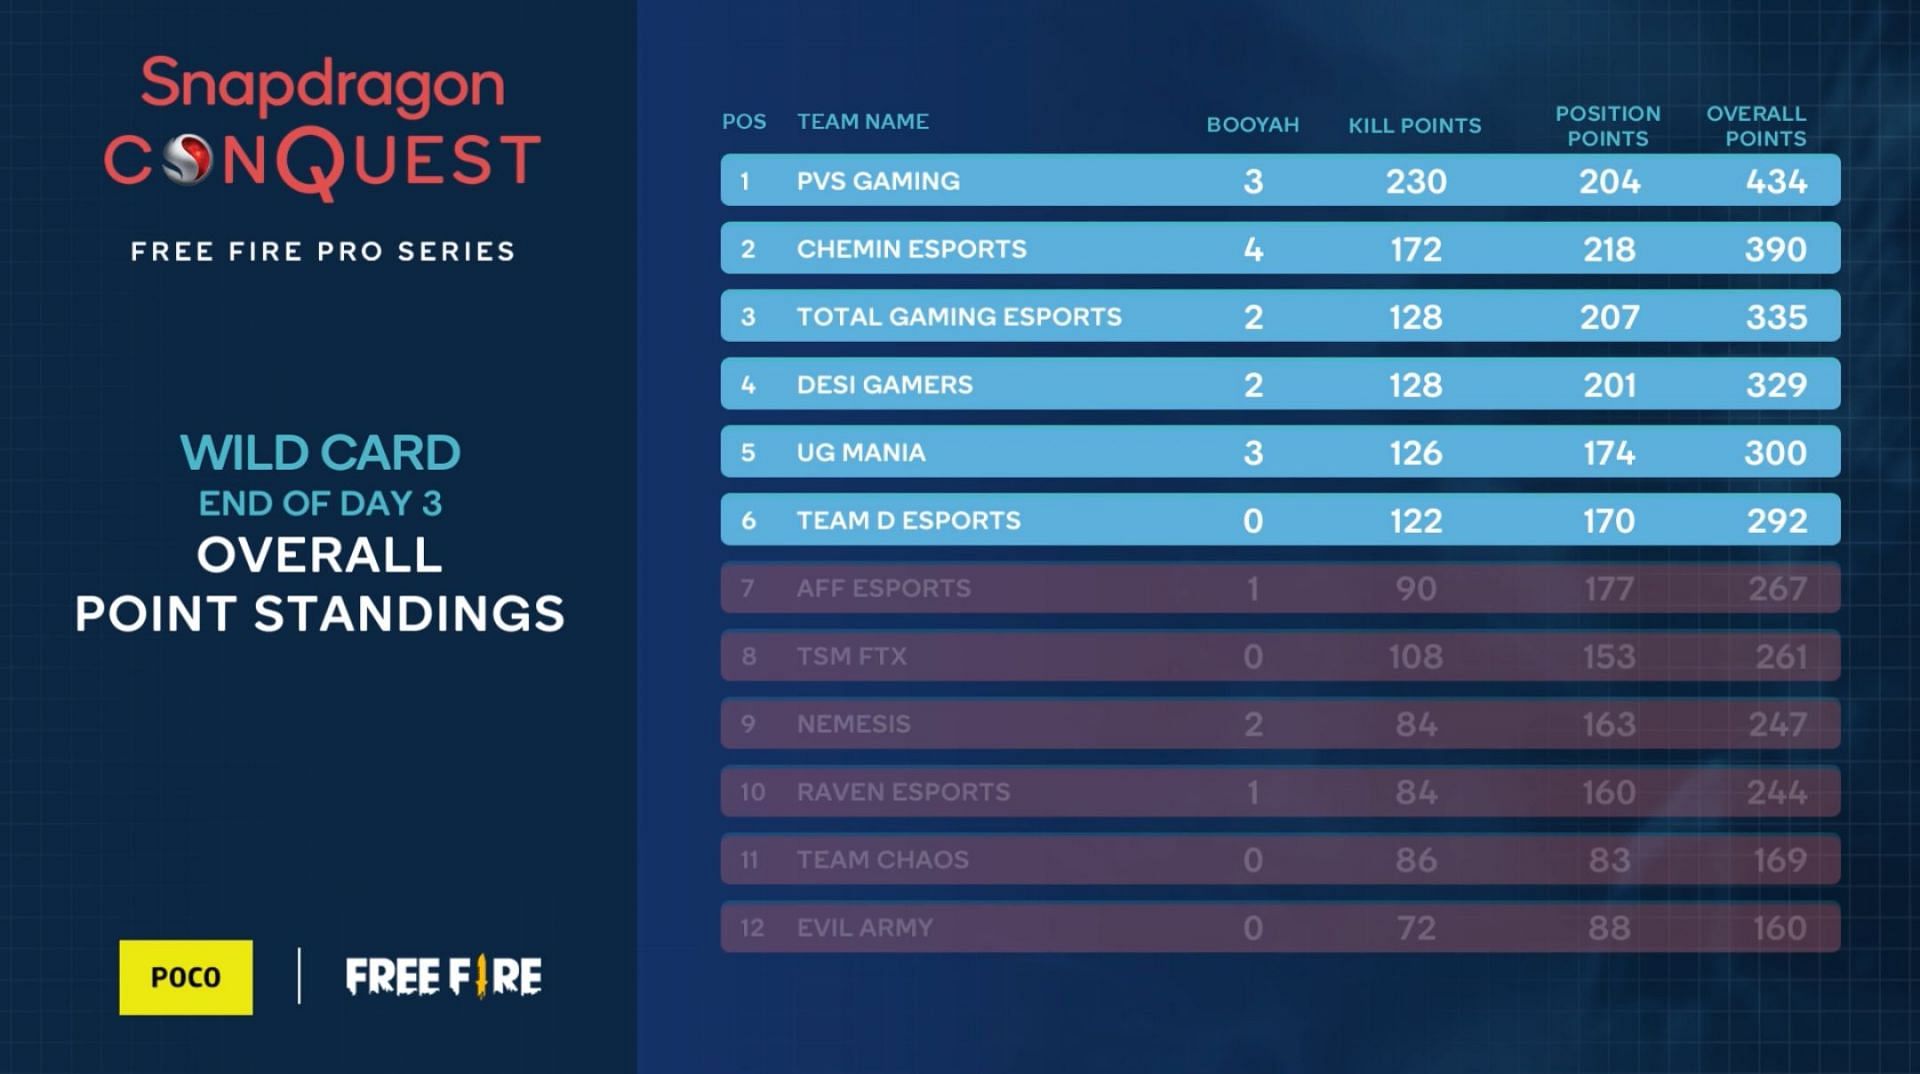 Free Fire Pro Series Wild Card overall standings (image via snapdragon)